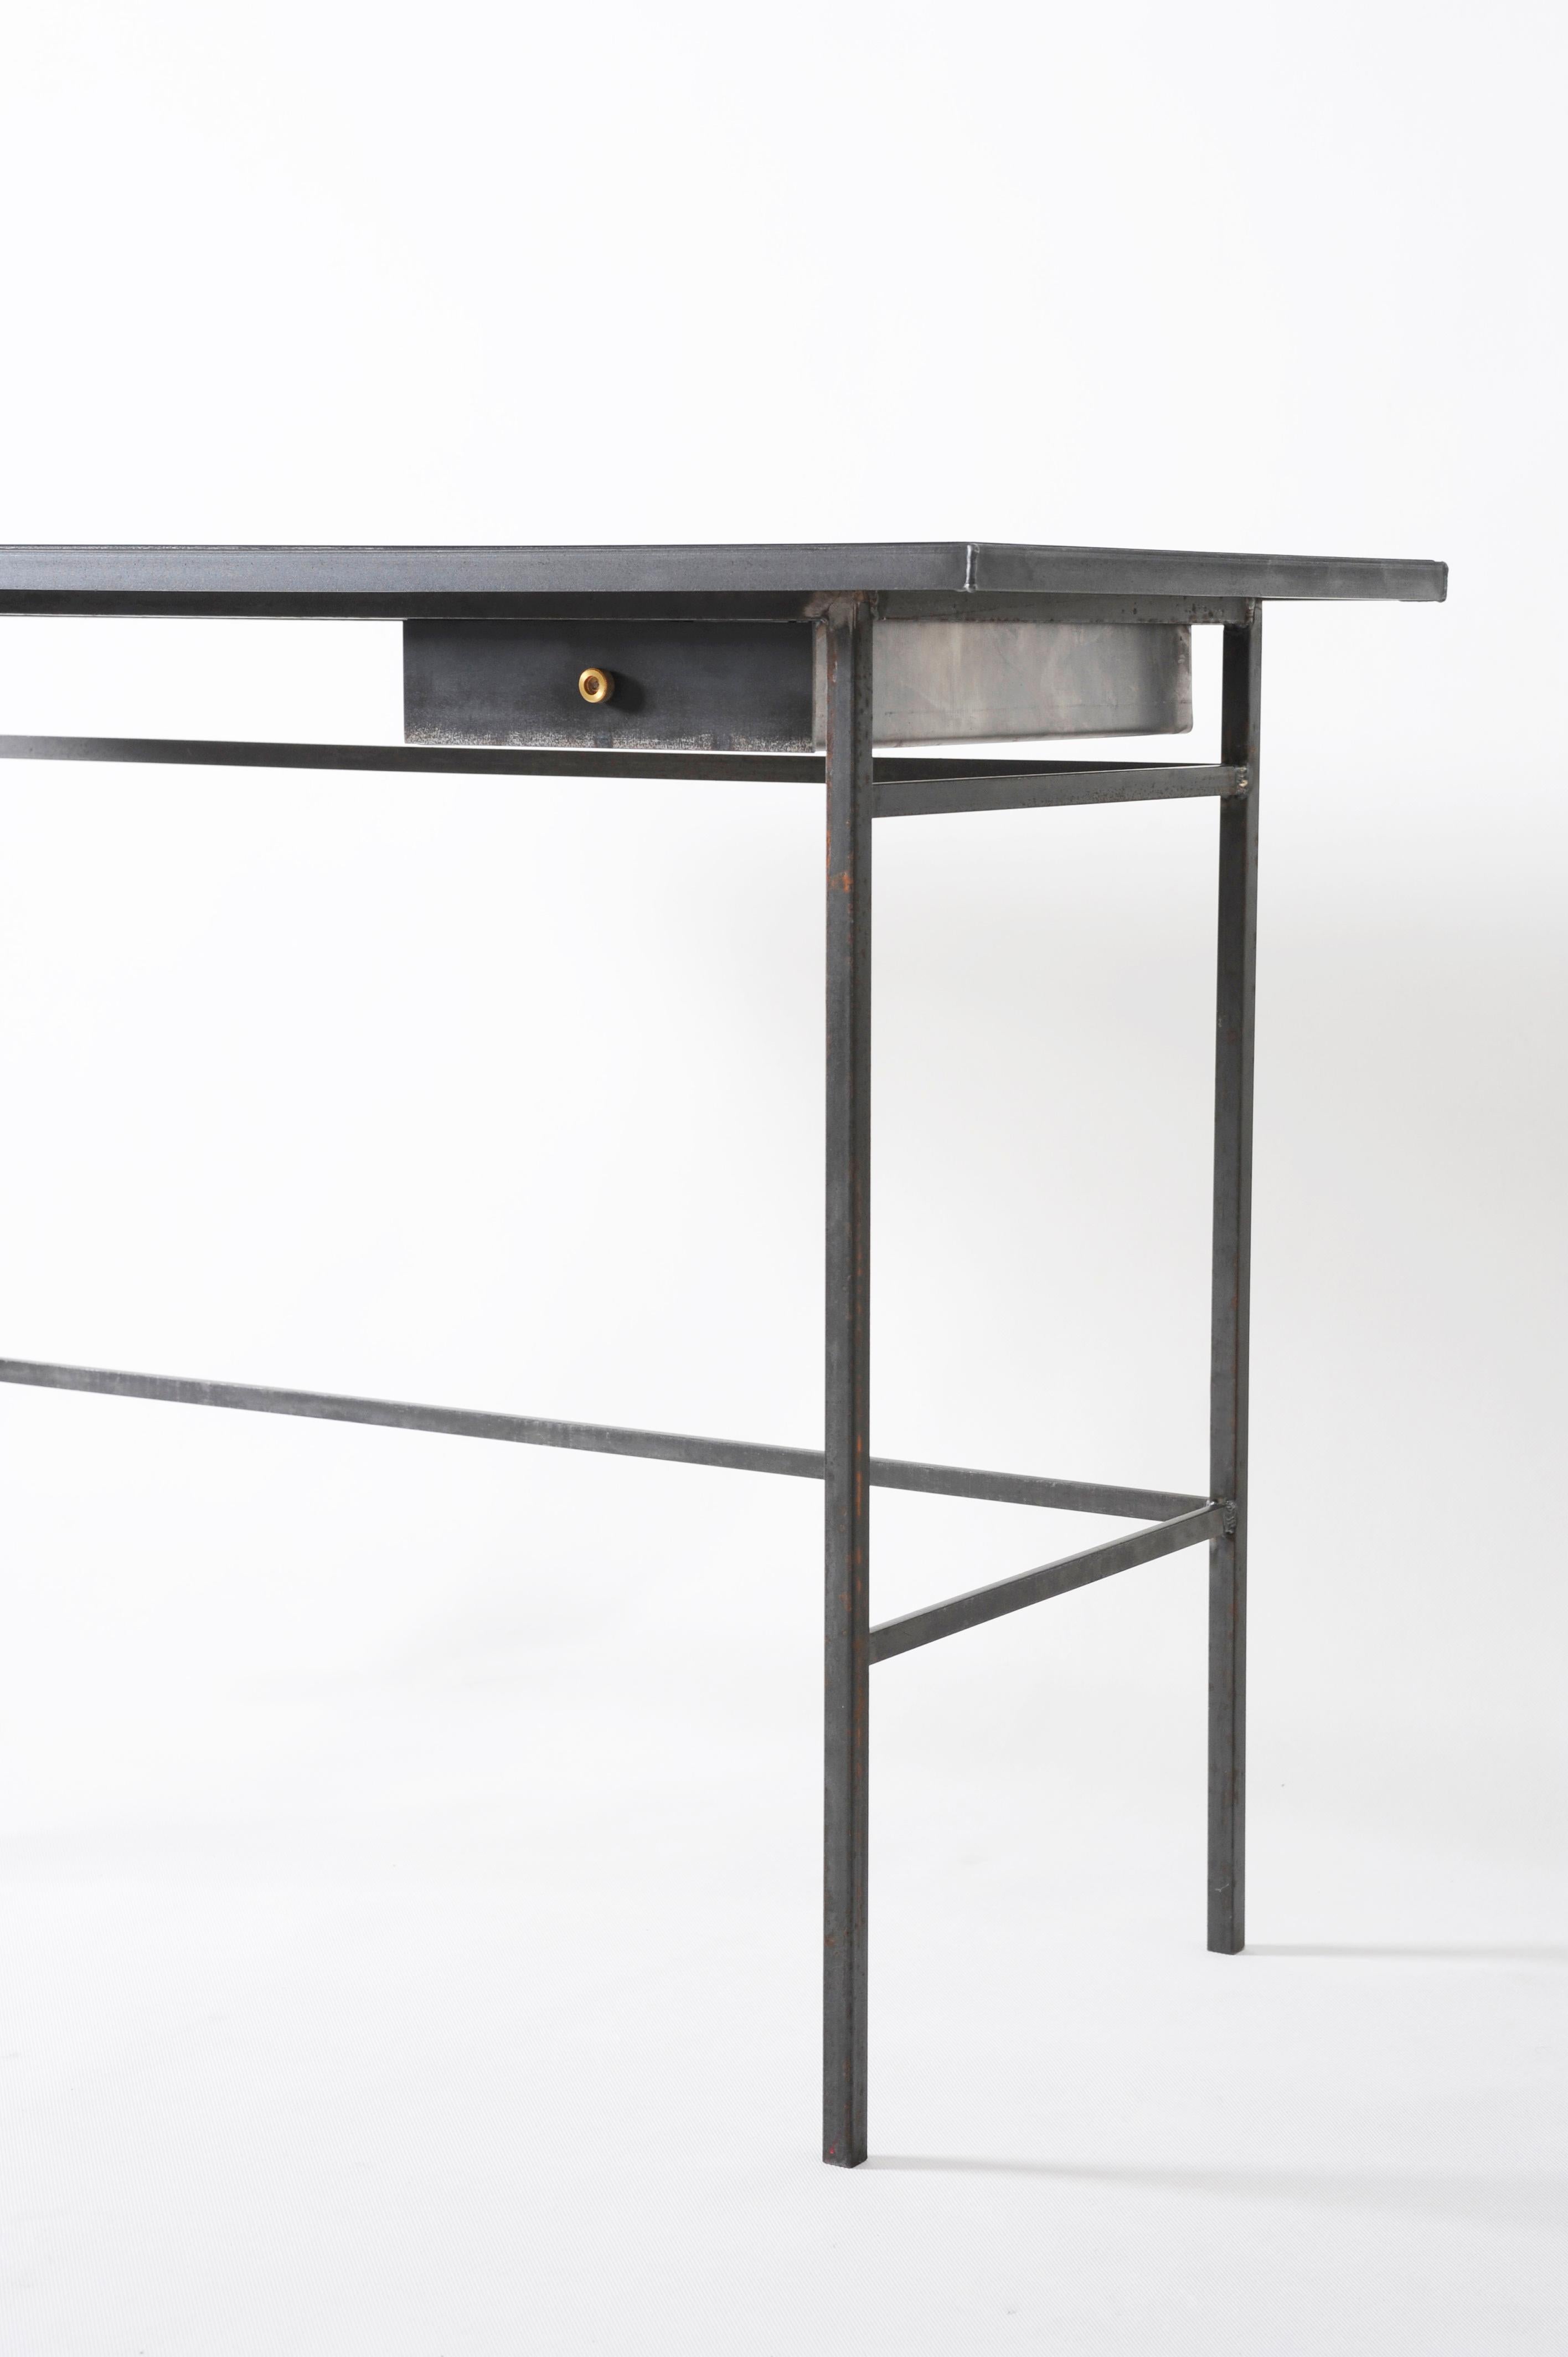 Hand, sculpted desk, signed by Lukas Friedrich
Desk “Gloomy Sunday”
Measures: 110 x 50 H 76 cm
Finish: raw, waxed steel with brass drawer knob
Top: dyed and oiled oak veneer (other options on
demand)
Limited Edition of 50
Signed